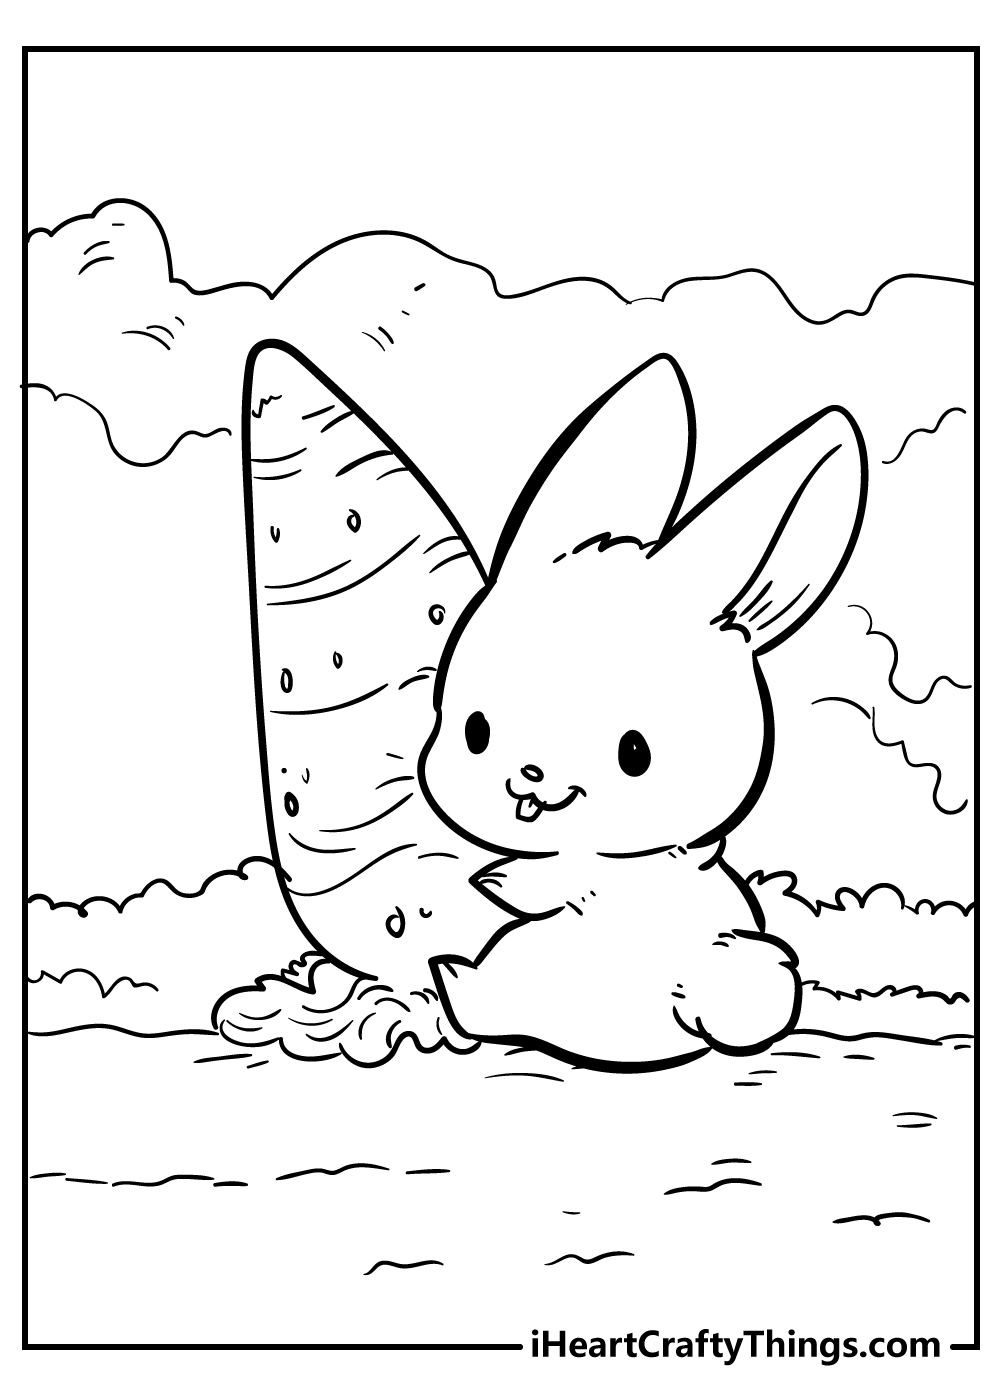 Cute Animals Coloring Pages Updated 20